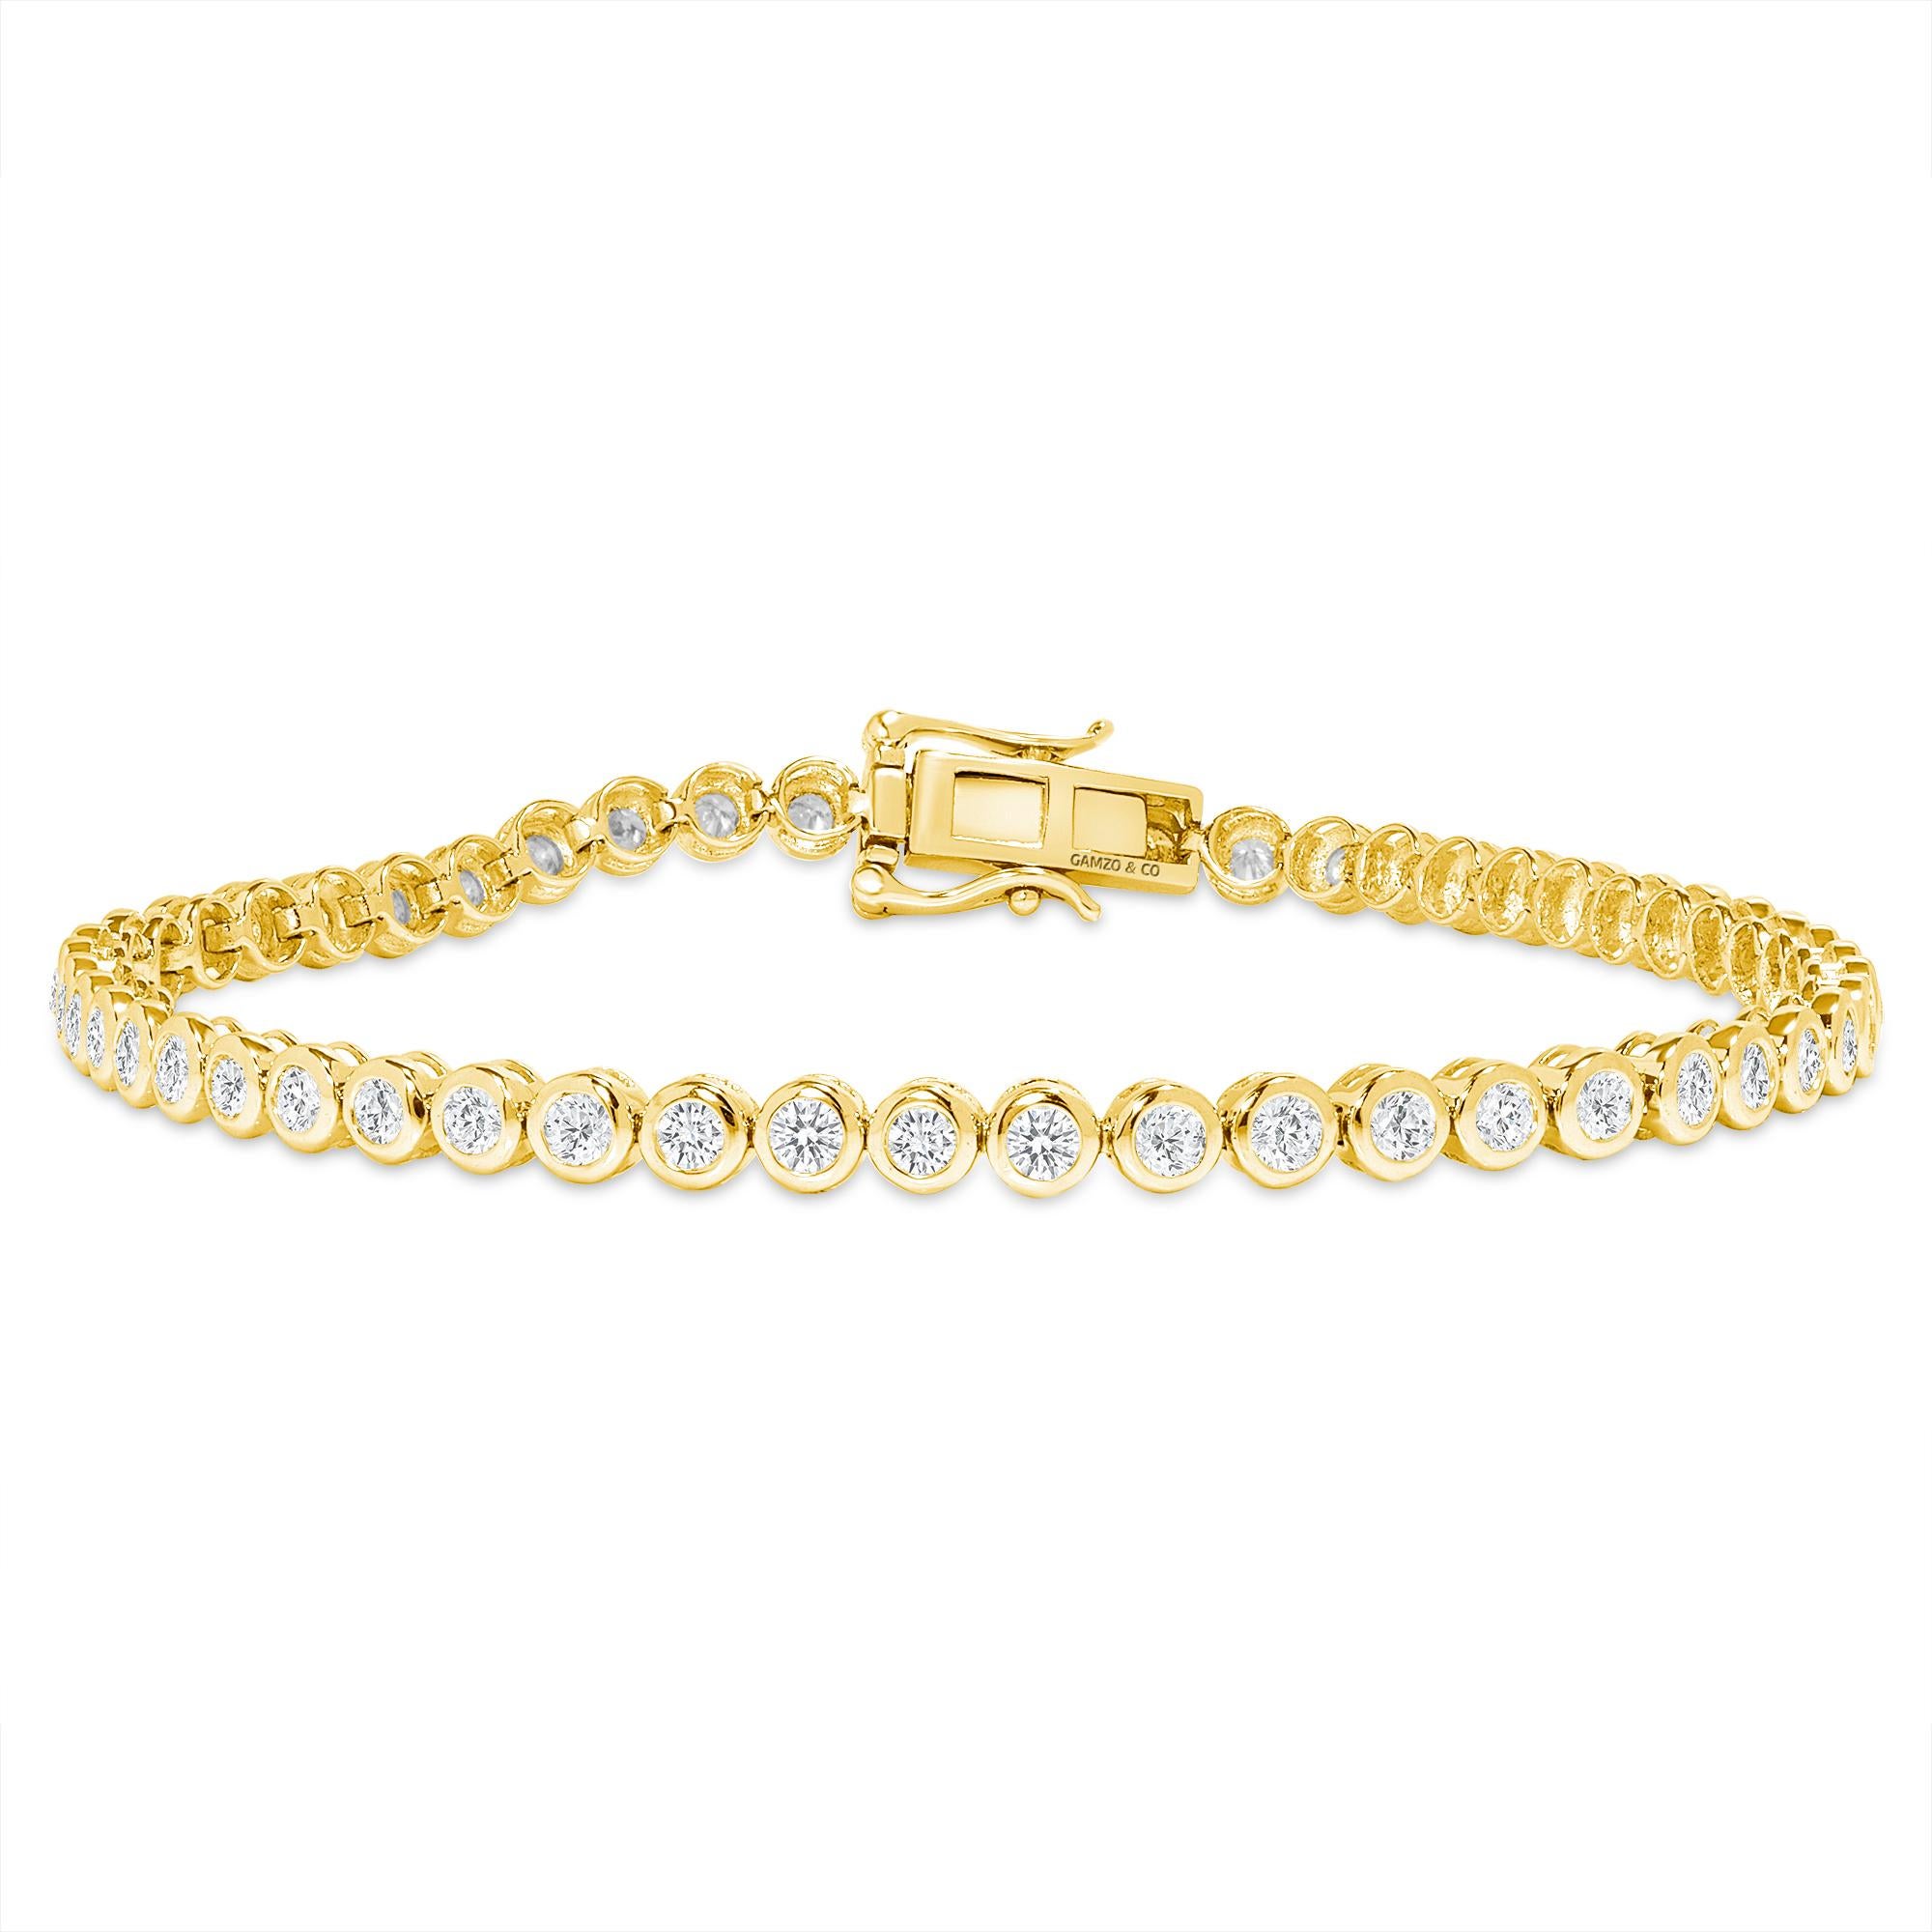 These beautiful round diamonds dance around your wrist as they absorb light and attention.
Metal: 14k Gold
Diamond Cut: Round
Diamond Total Carats: 5ct
Diamond Clarity: VS
Diamond Color: F
Color: Yellow Gold
Bracelet Length: 5.5 Inches 
Included